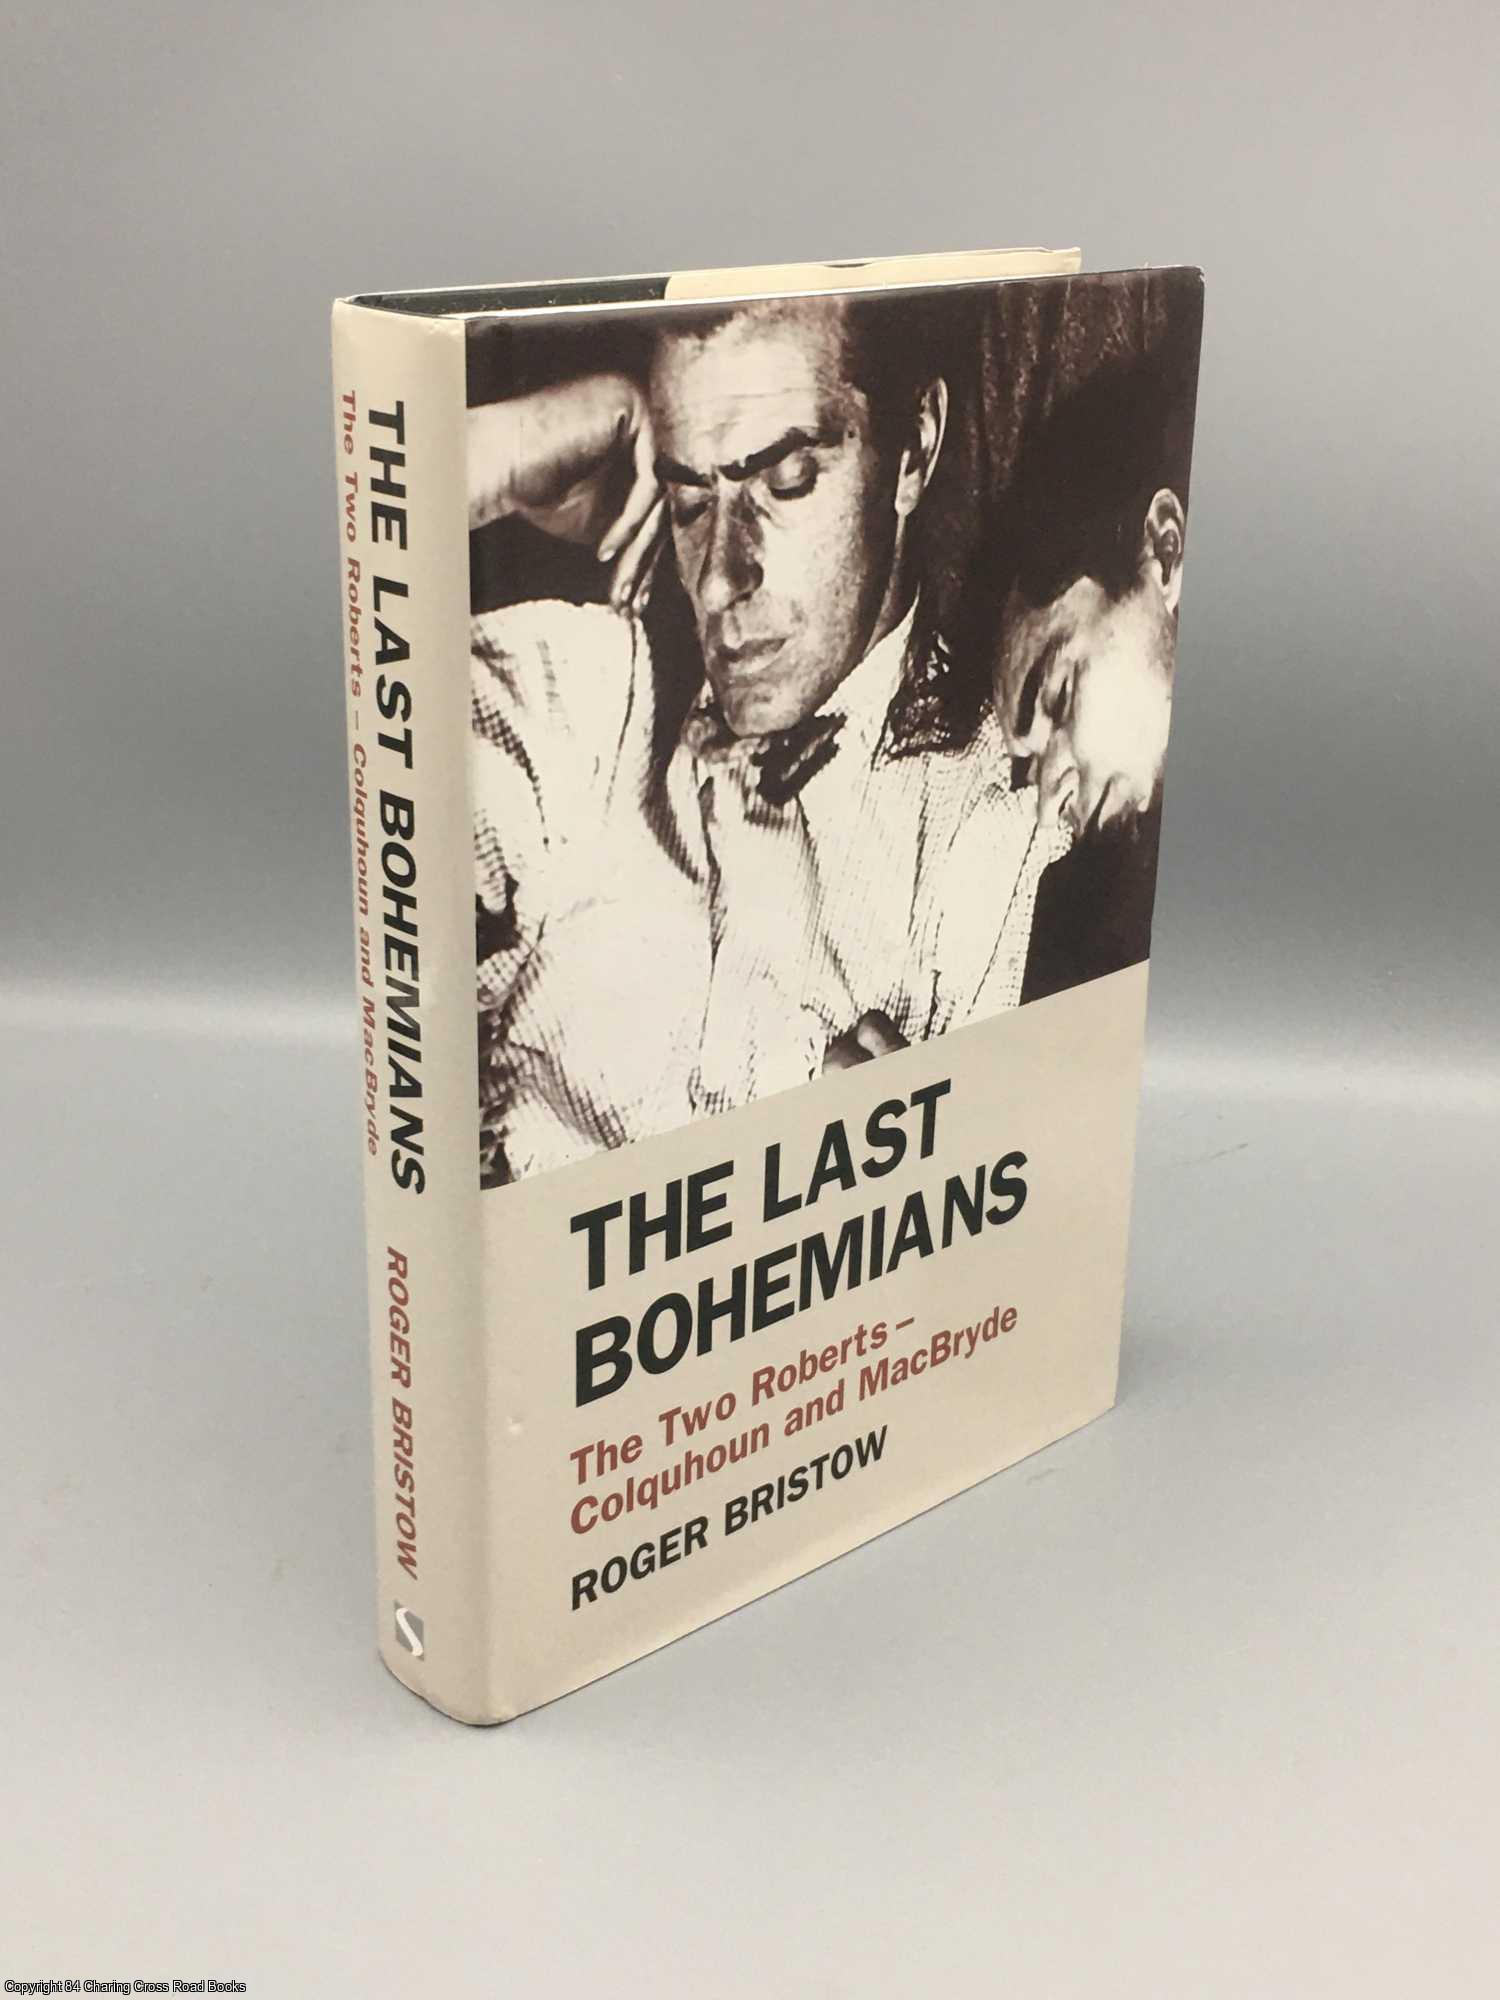 Bristow, Roger - The Last Bohemians: the two Roberts - Colquhoun and MacBryde